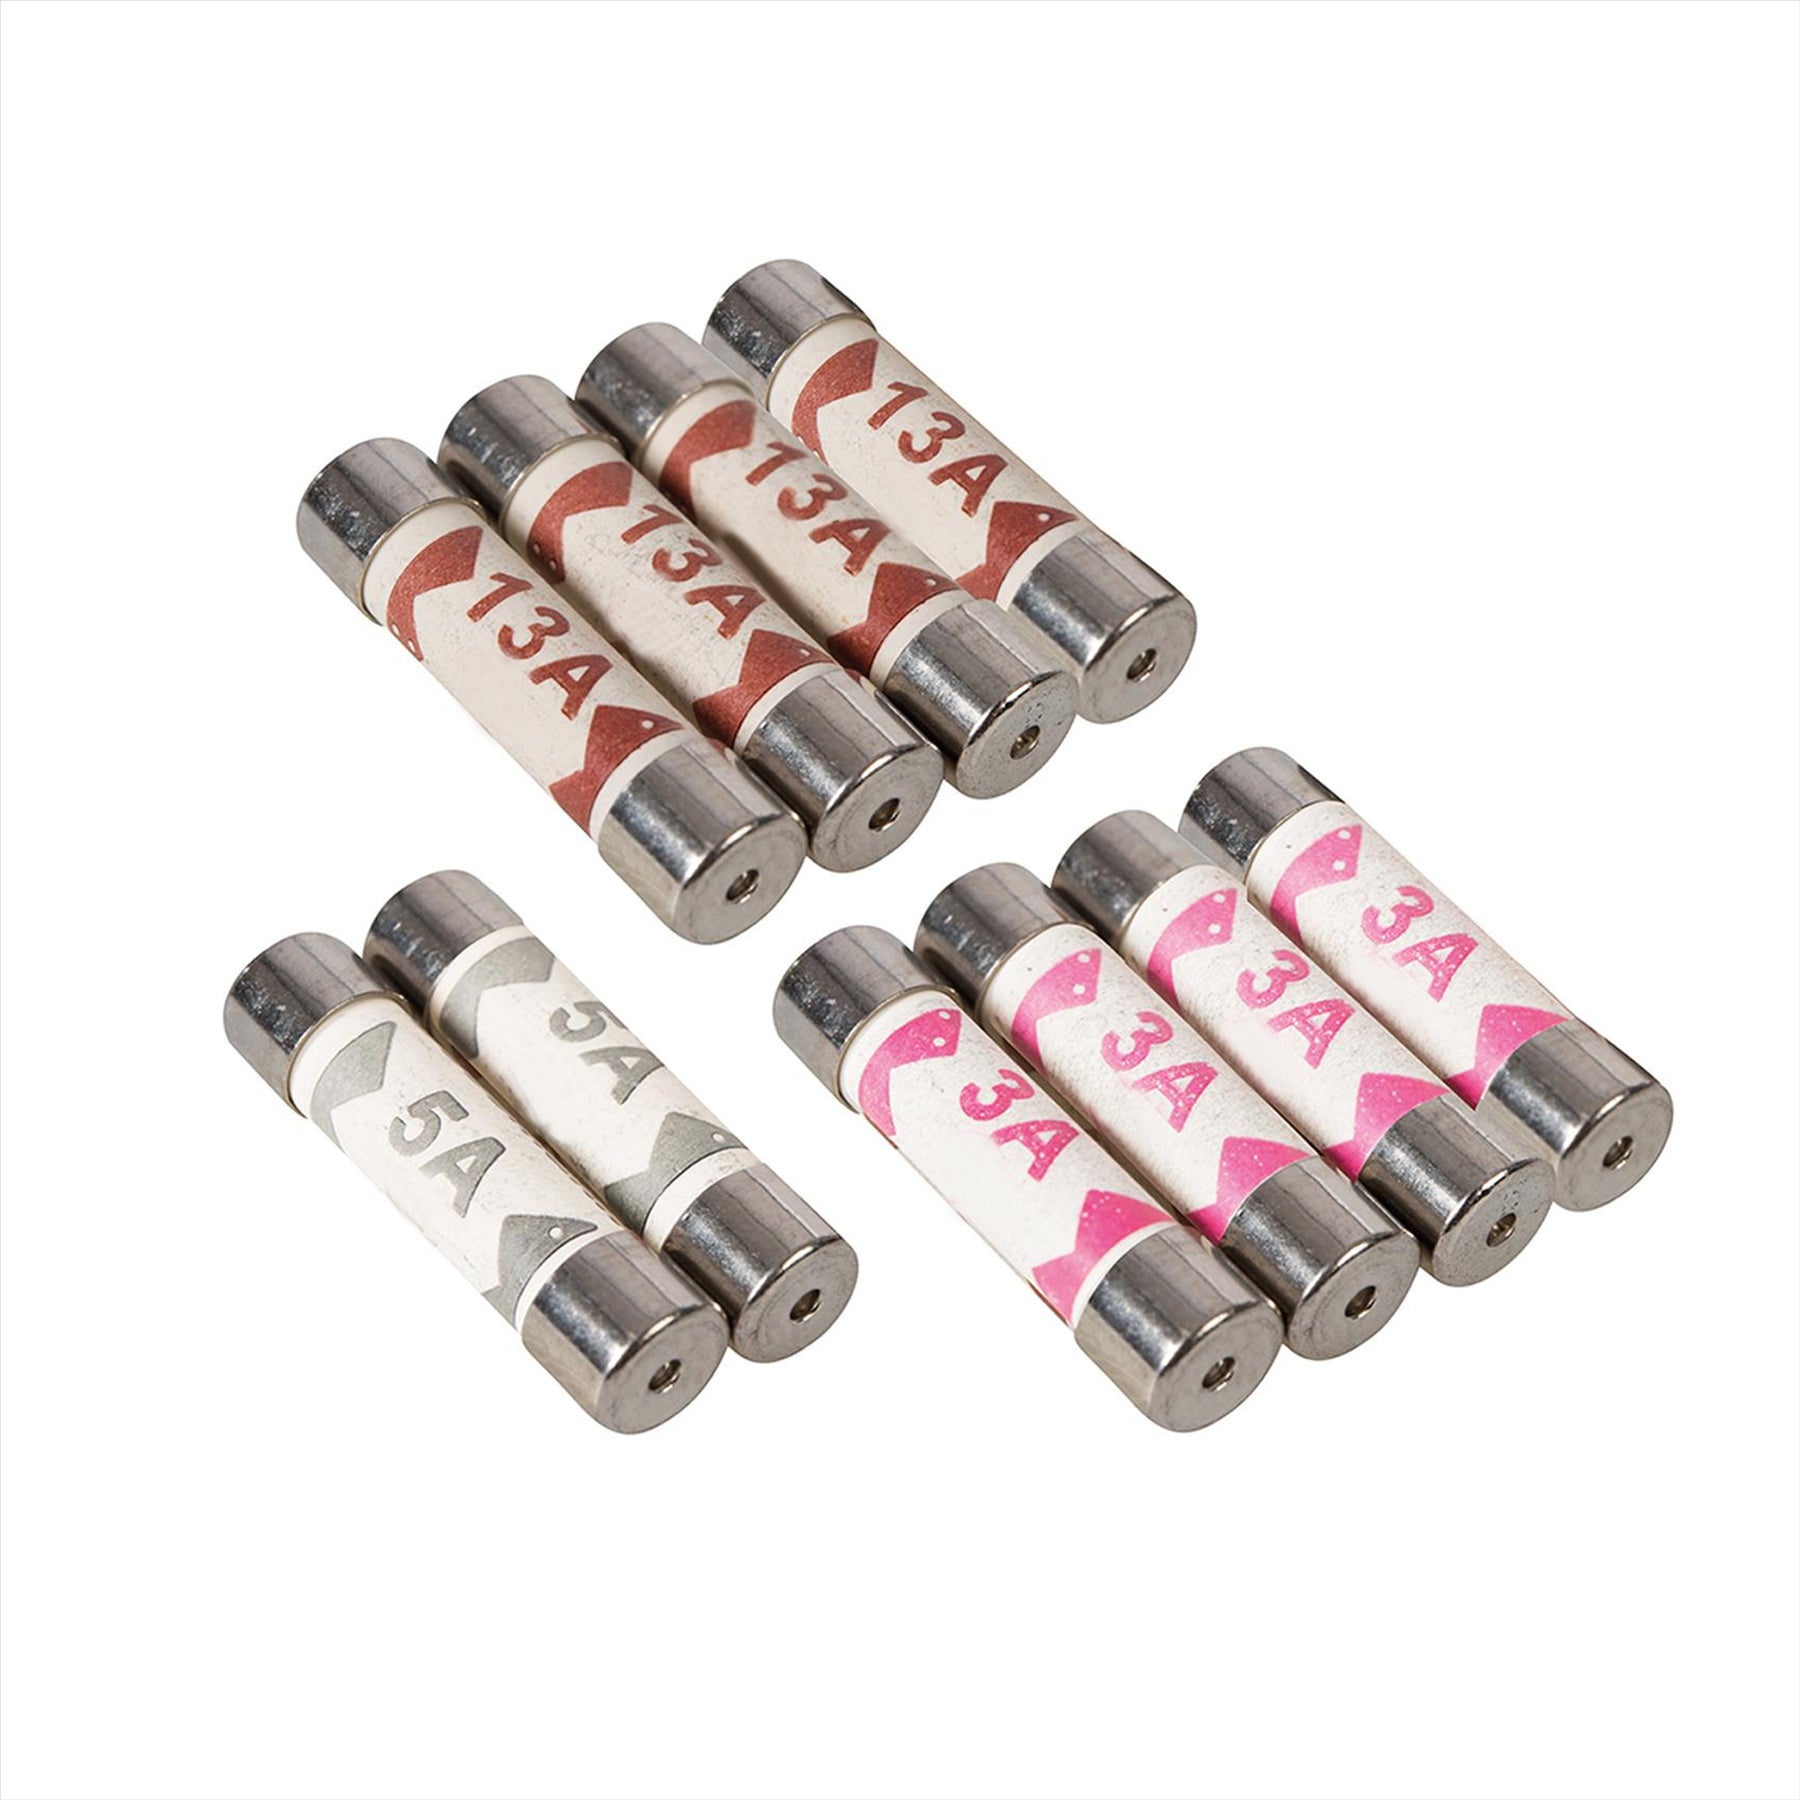 10 x Mixed Ceramic Fuses Household Domestic Mains Plug Top 3A 5A 13Amp ASTA